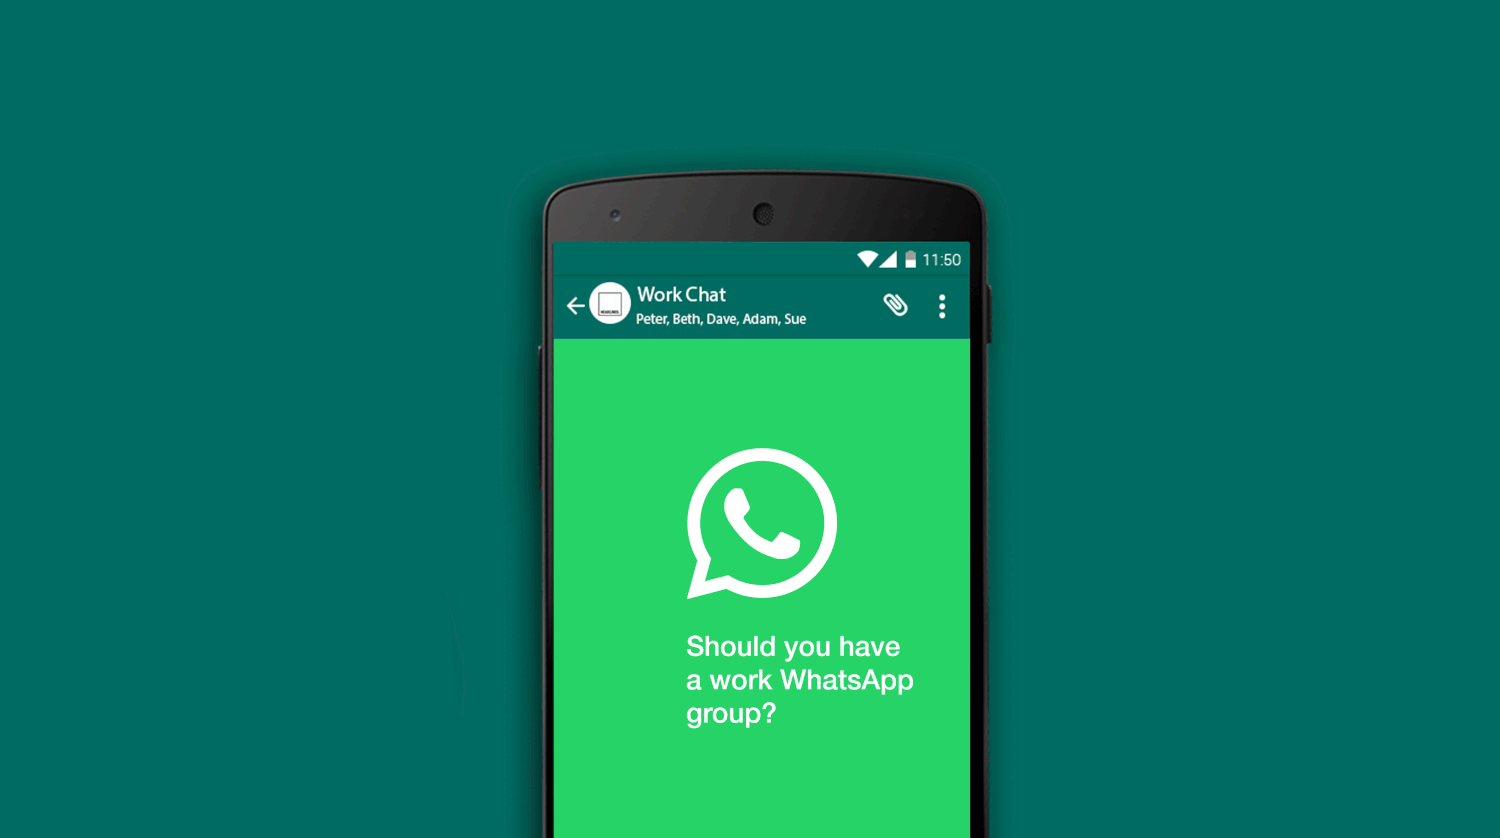 Should you have a work WhatsApp group? — Headlines